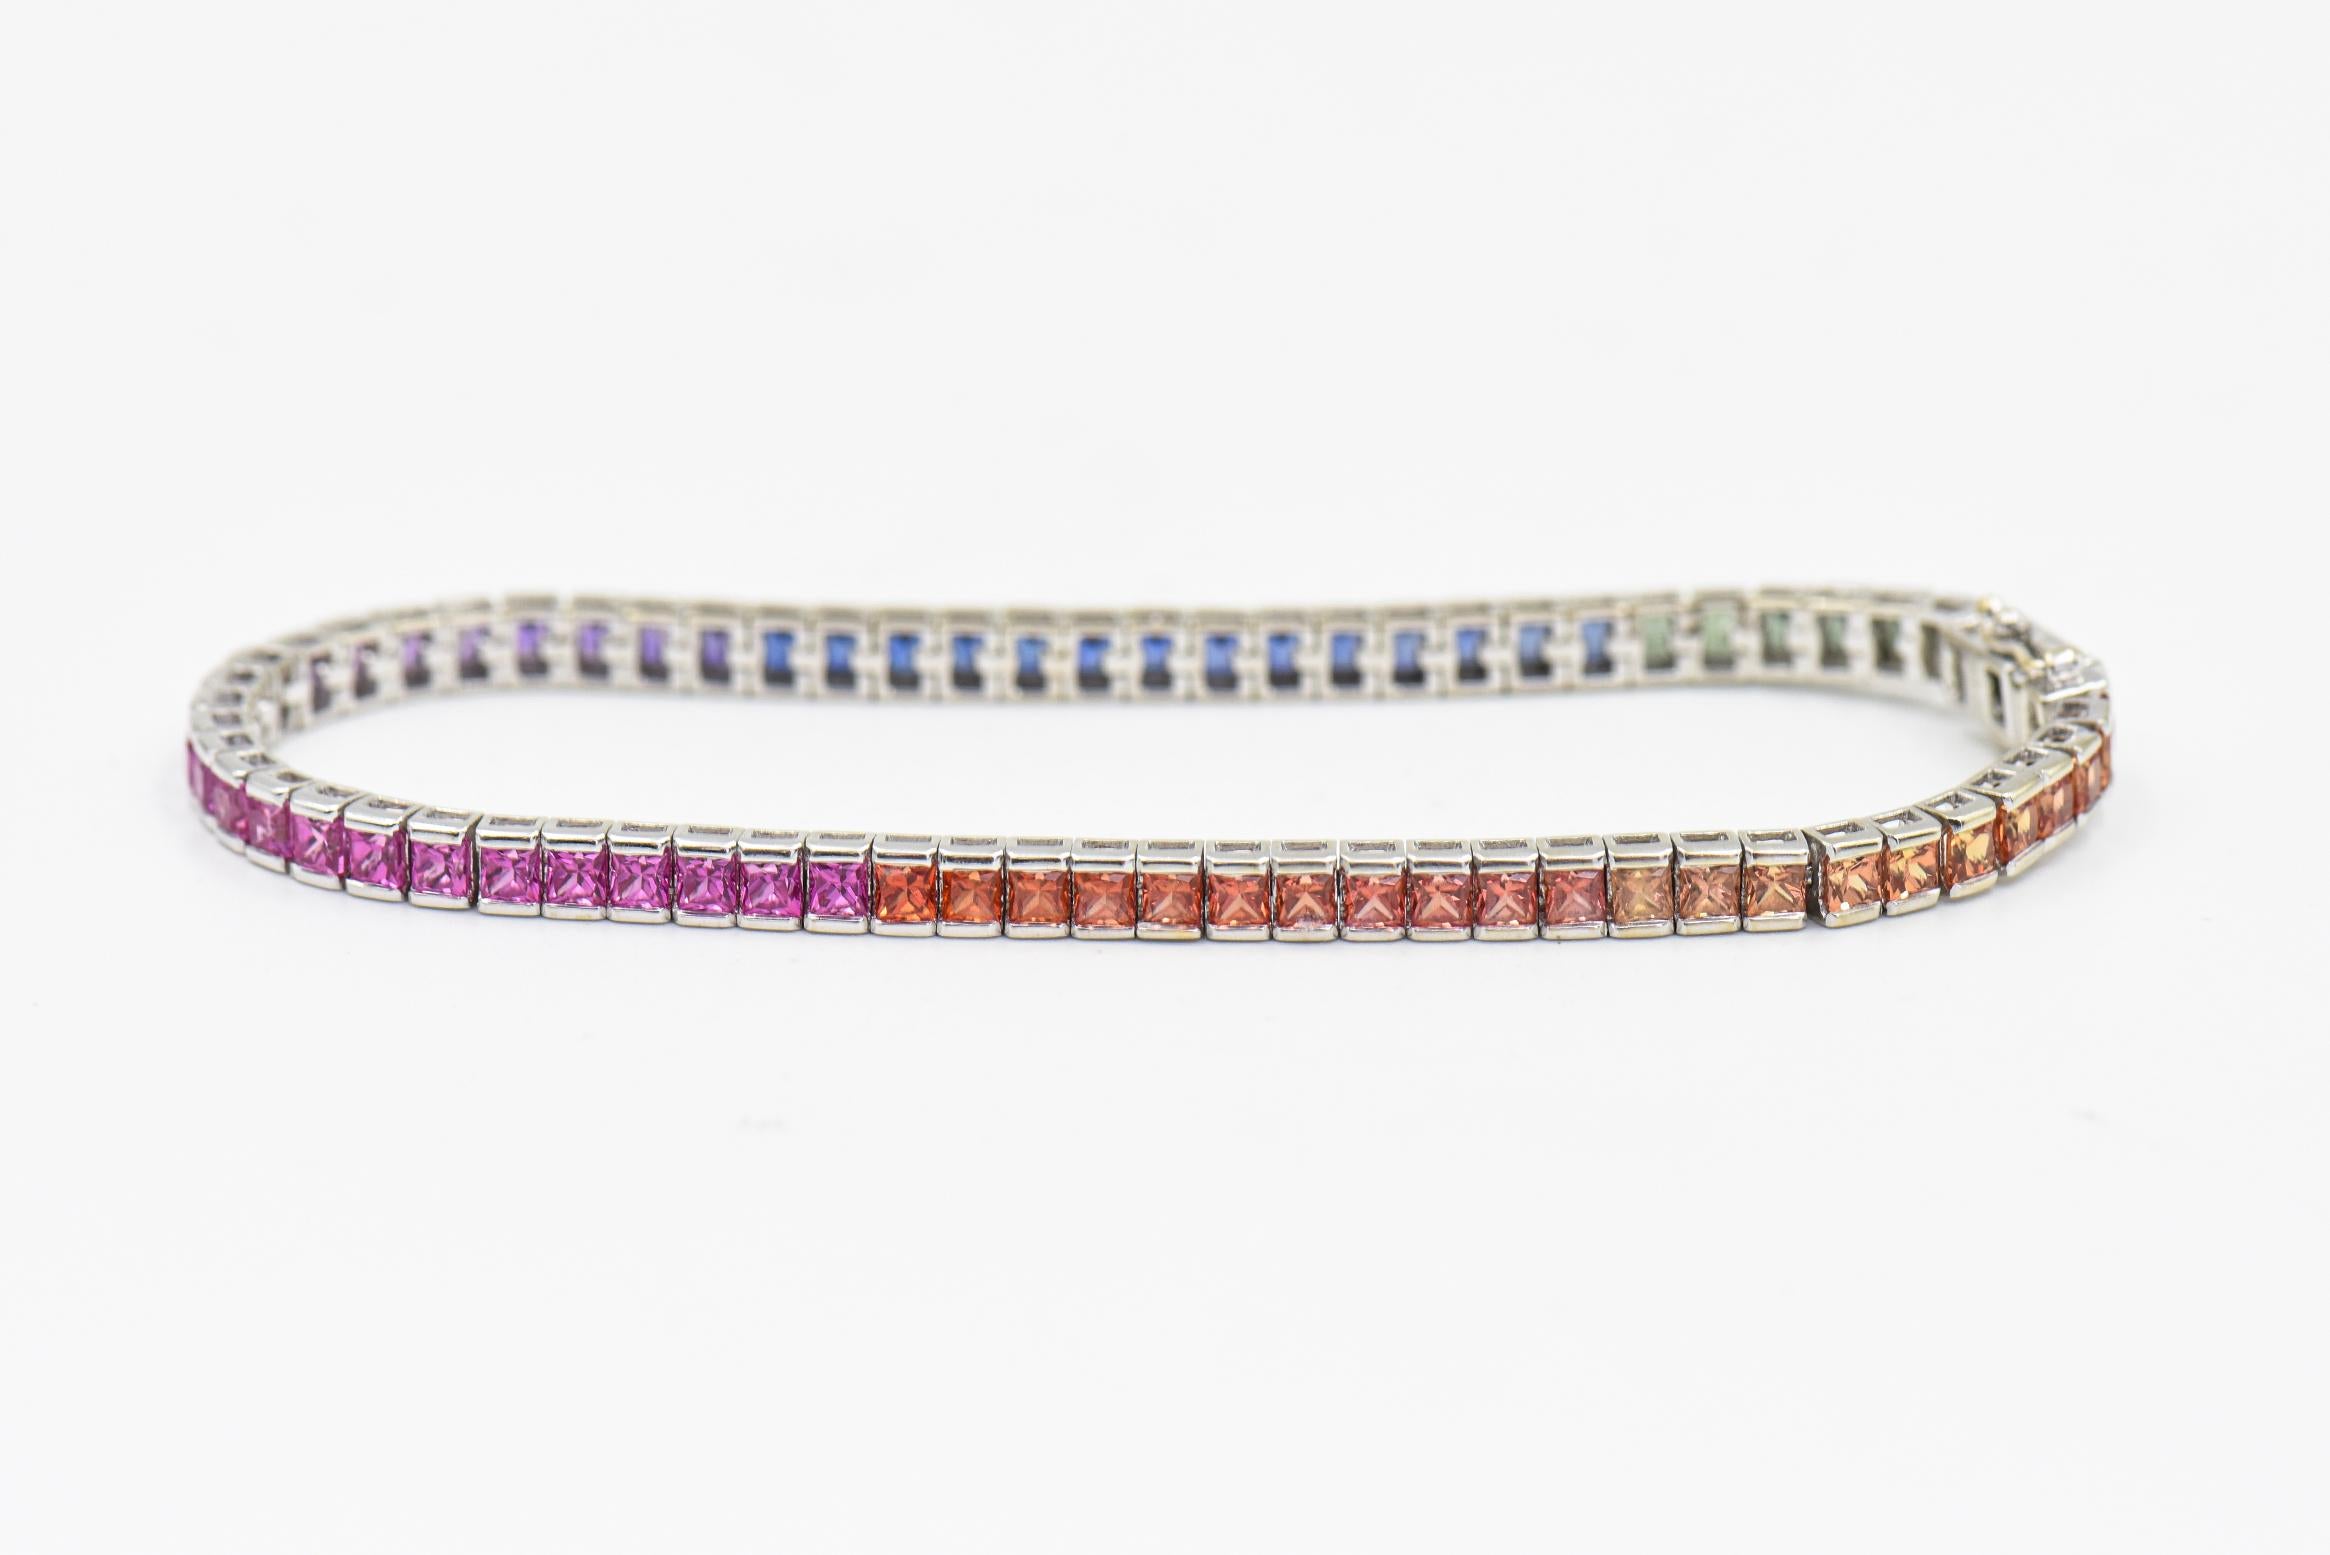 This colorful bracelet contains 69 multi color princess cut sapphires with an estimated total weight of 6.90 carats.  The colors from a light orange to a darker orange, pink to purple, and blue to green.  They are channel set in a 14K white gold